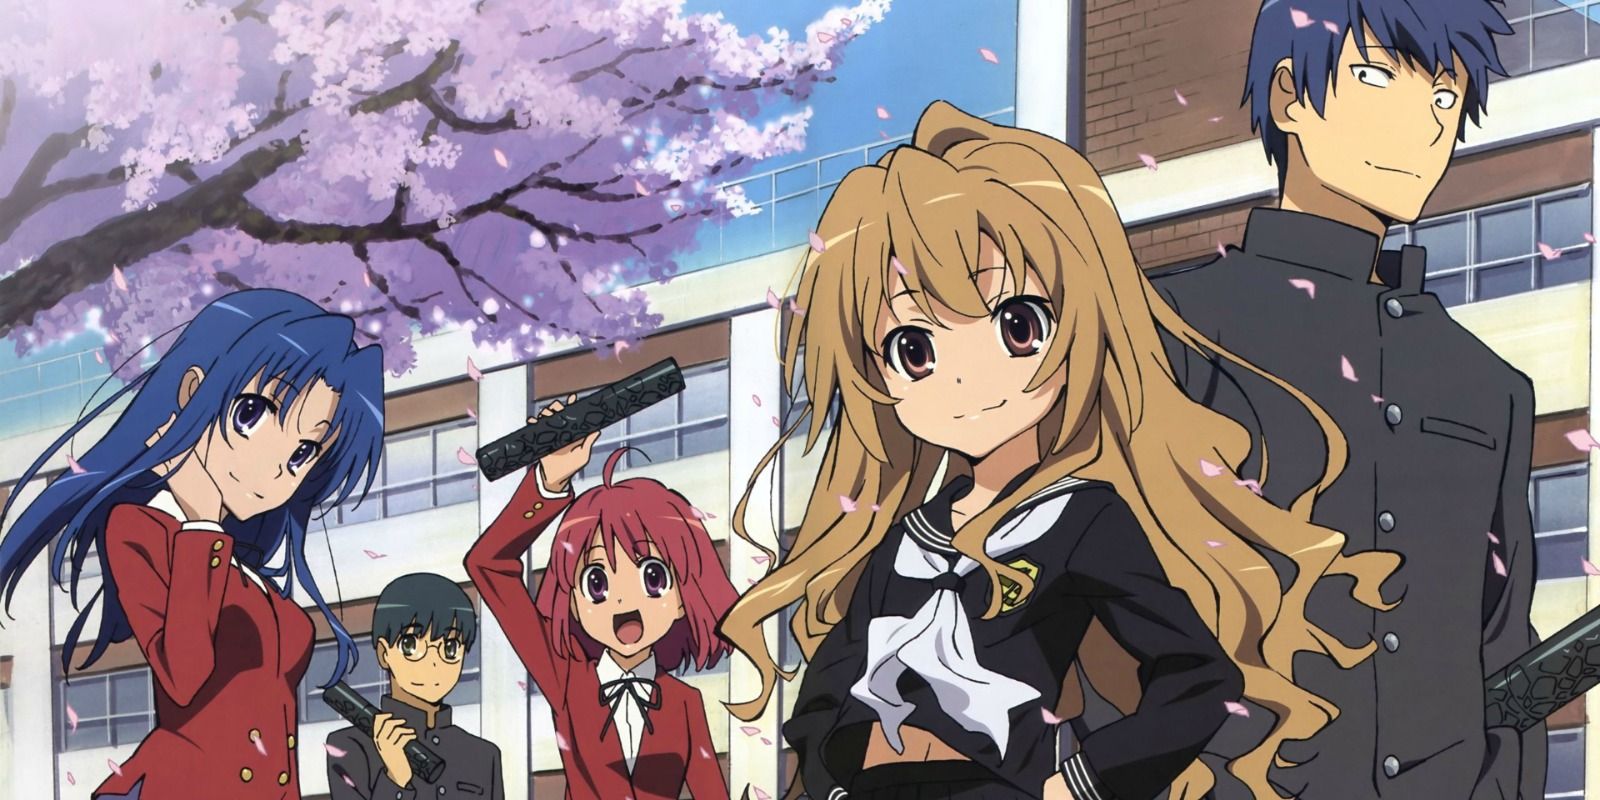 Toradora is really popular, so why does the author create more